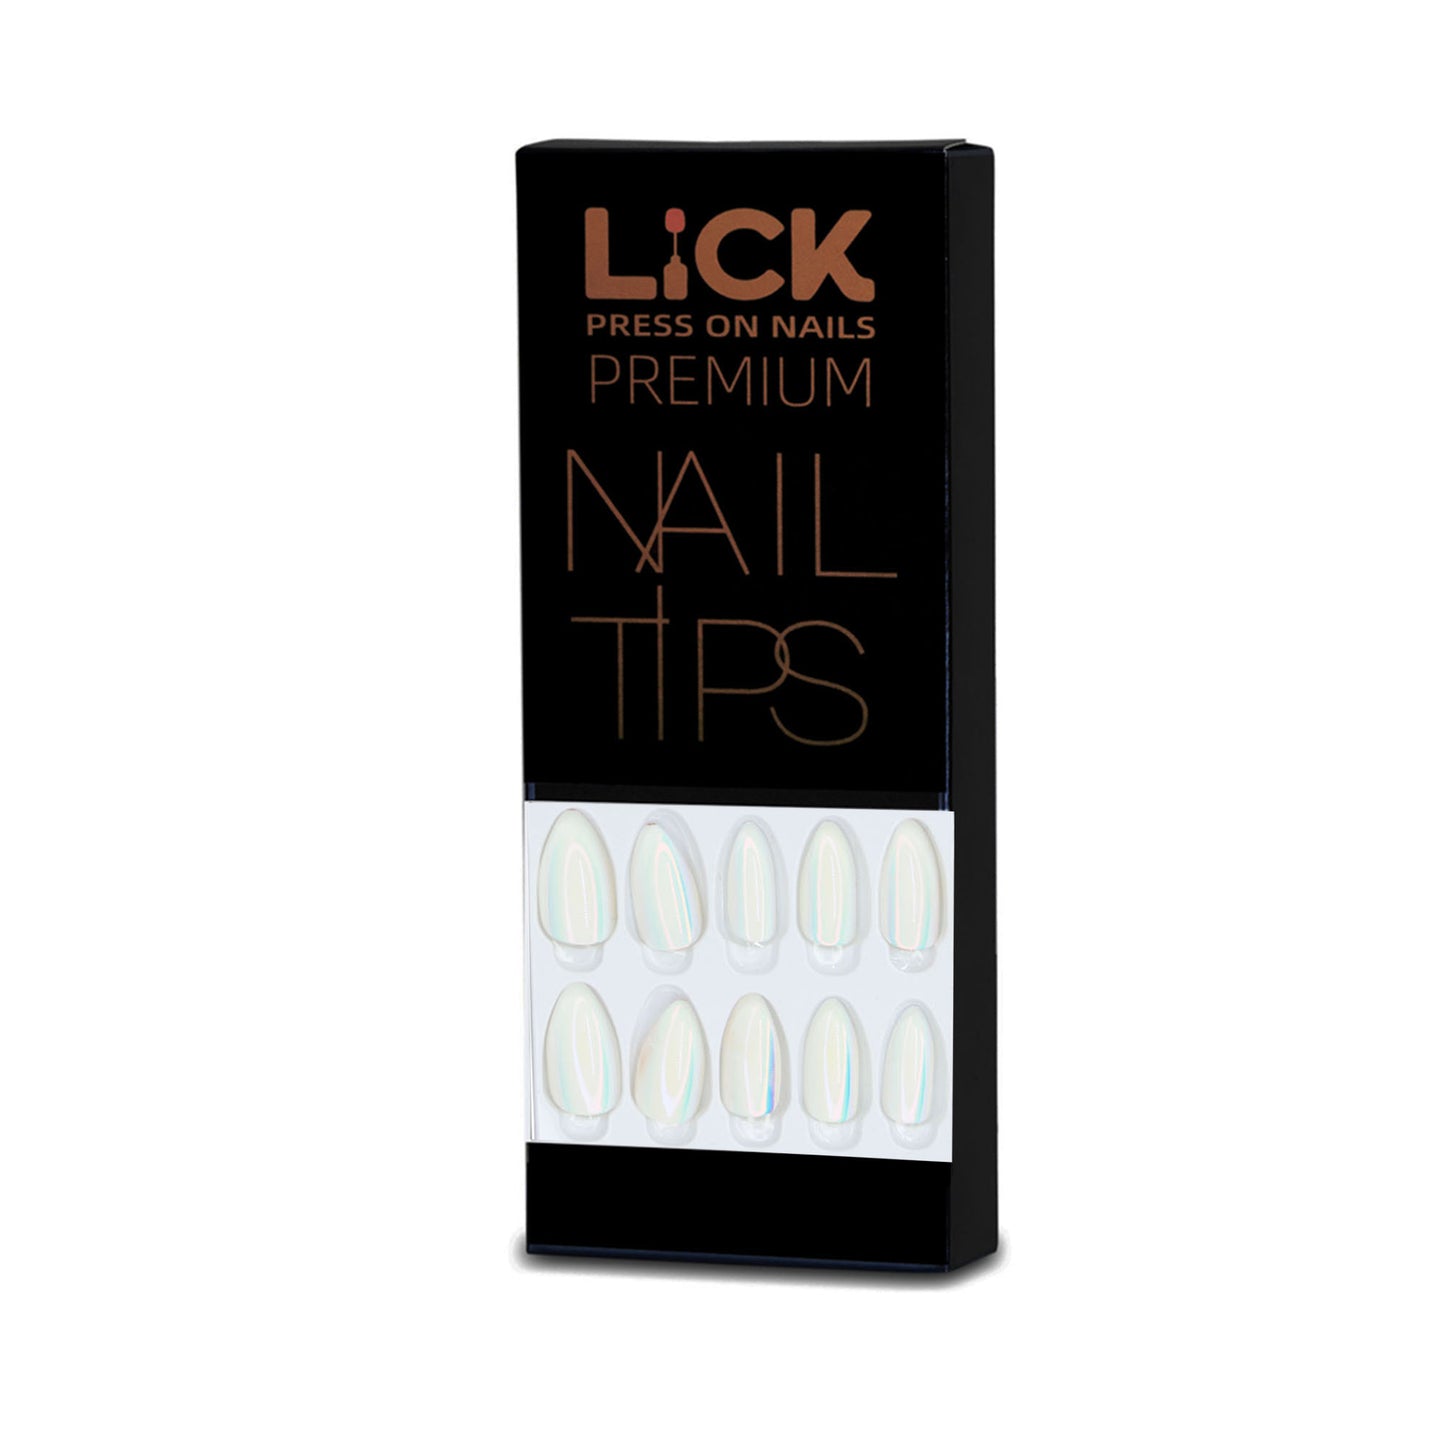 LICK NAILS Beige Nude With Studs Press on Nails